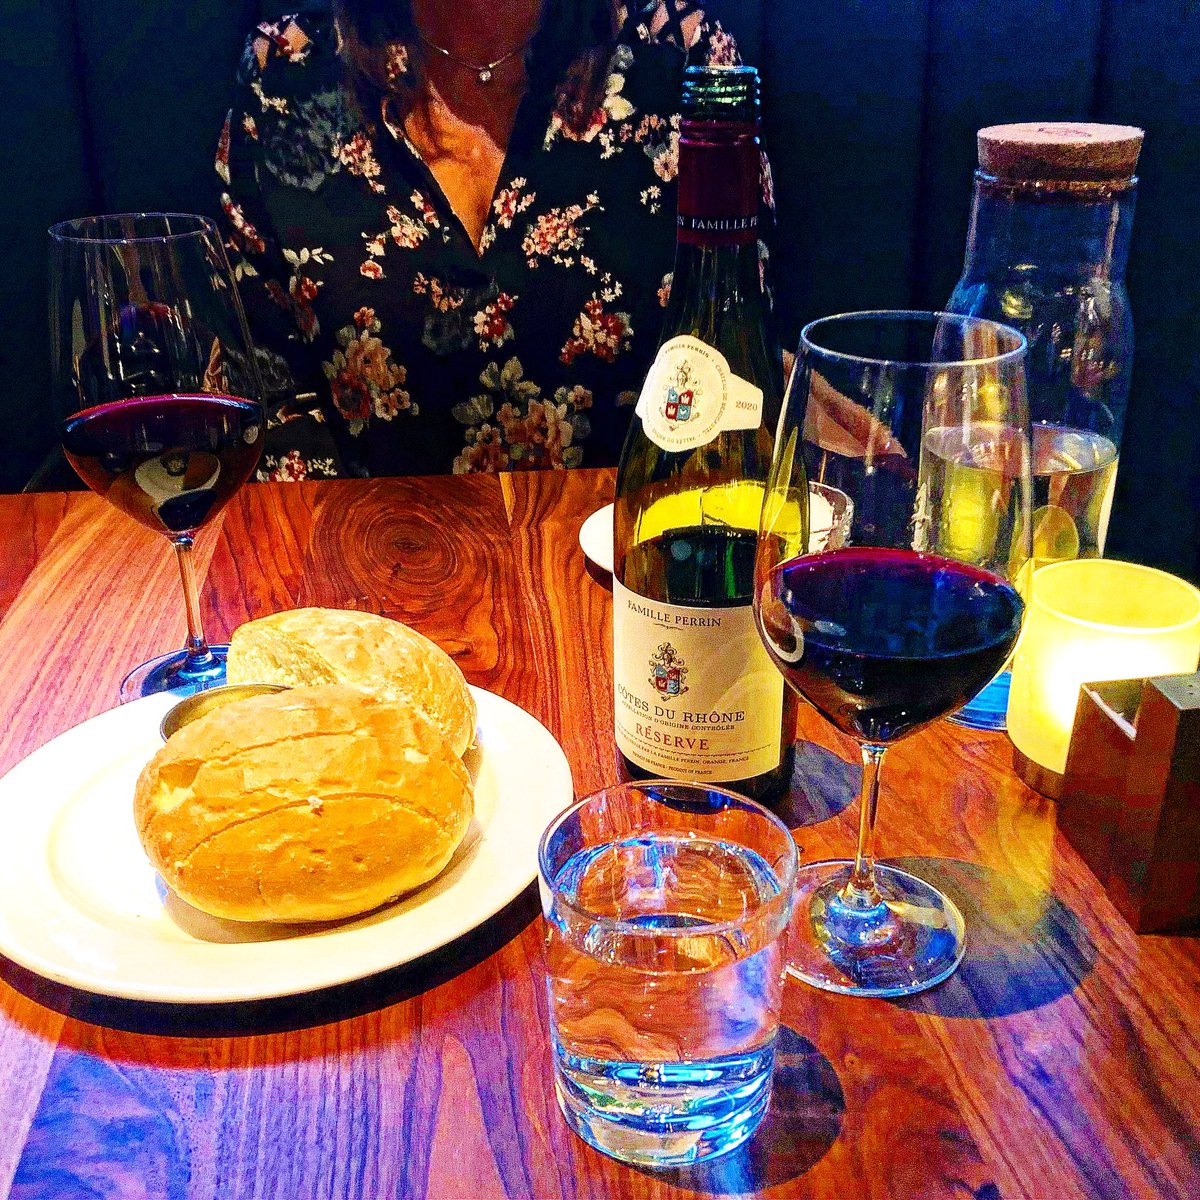 Filet Mignon & French Wine...
#travel #explore #foodie #wine #lux #weekendvibes #luxury #restaurant #food #winelover #weekend #vibes #perryssteakhouse #vino #friscotx #dallas #texas